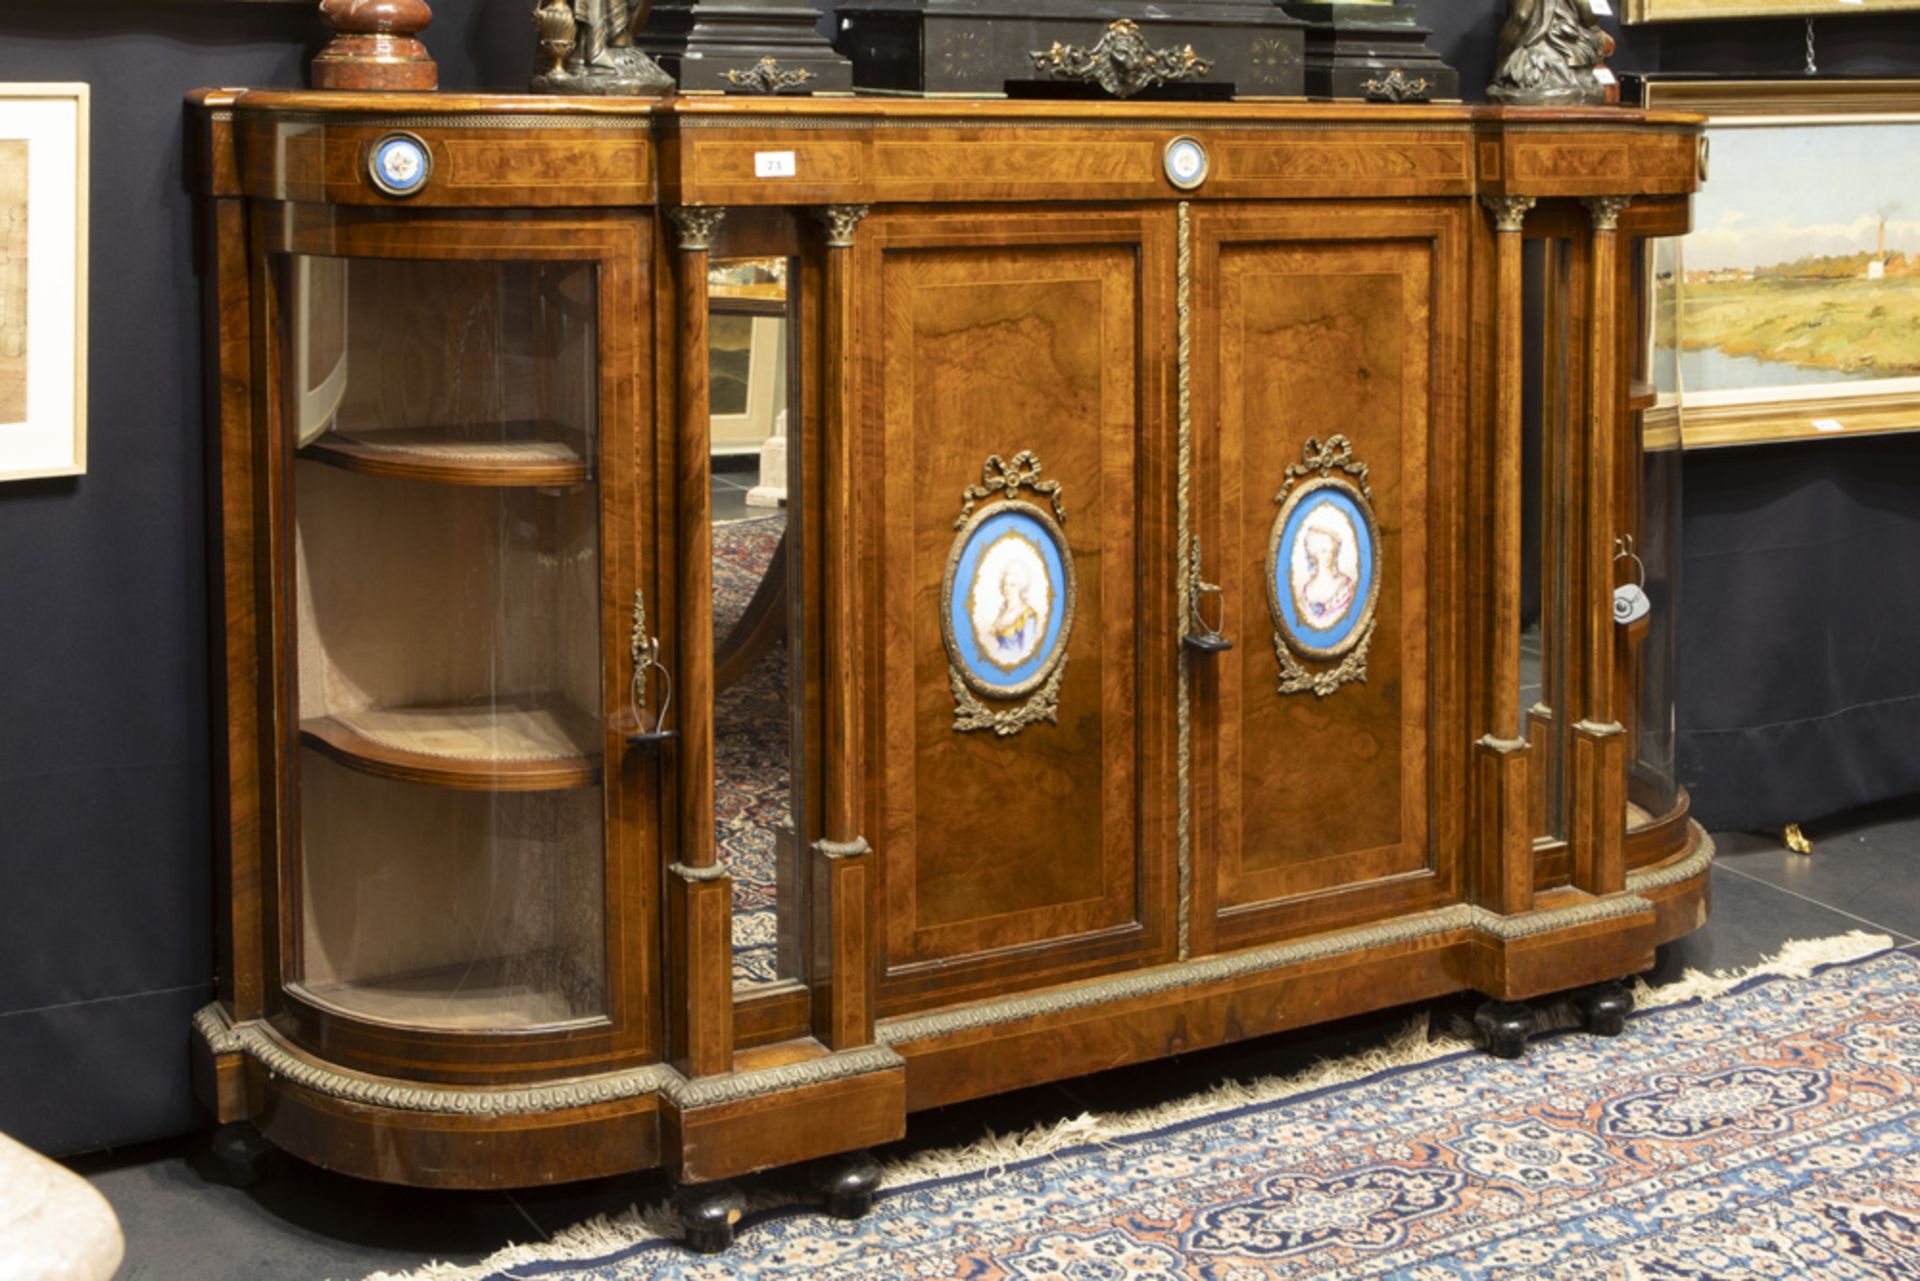 mid 19th Cent. European neoclassical displaycabinet (sideboard model) in burr of walnut with